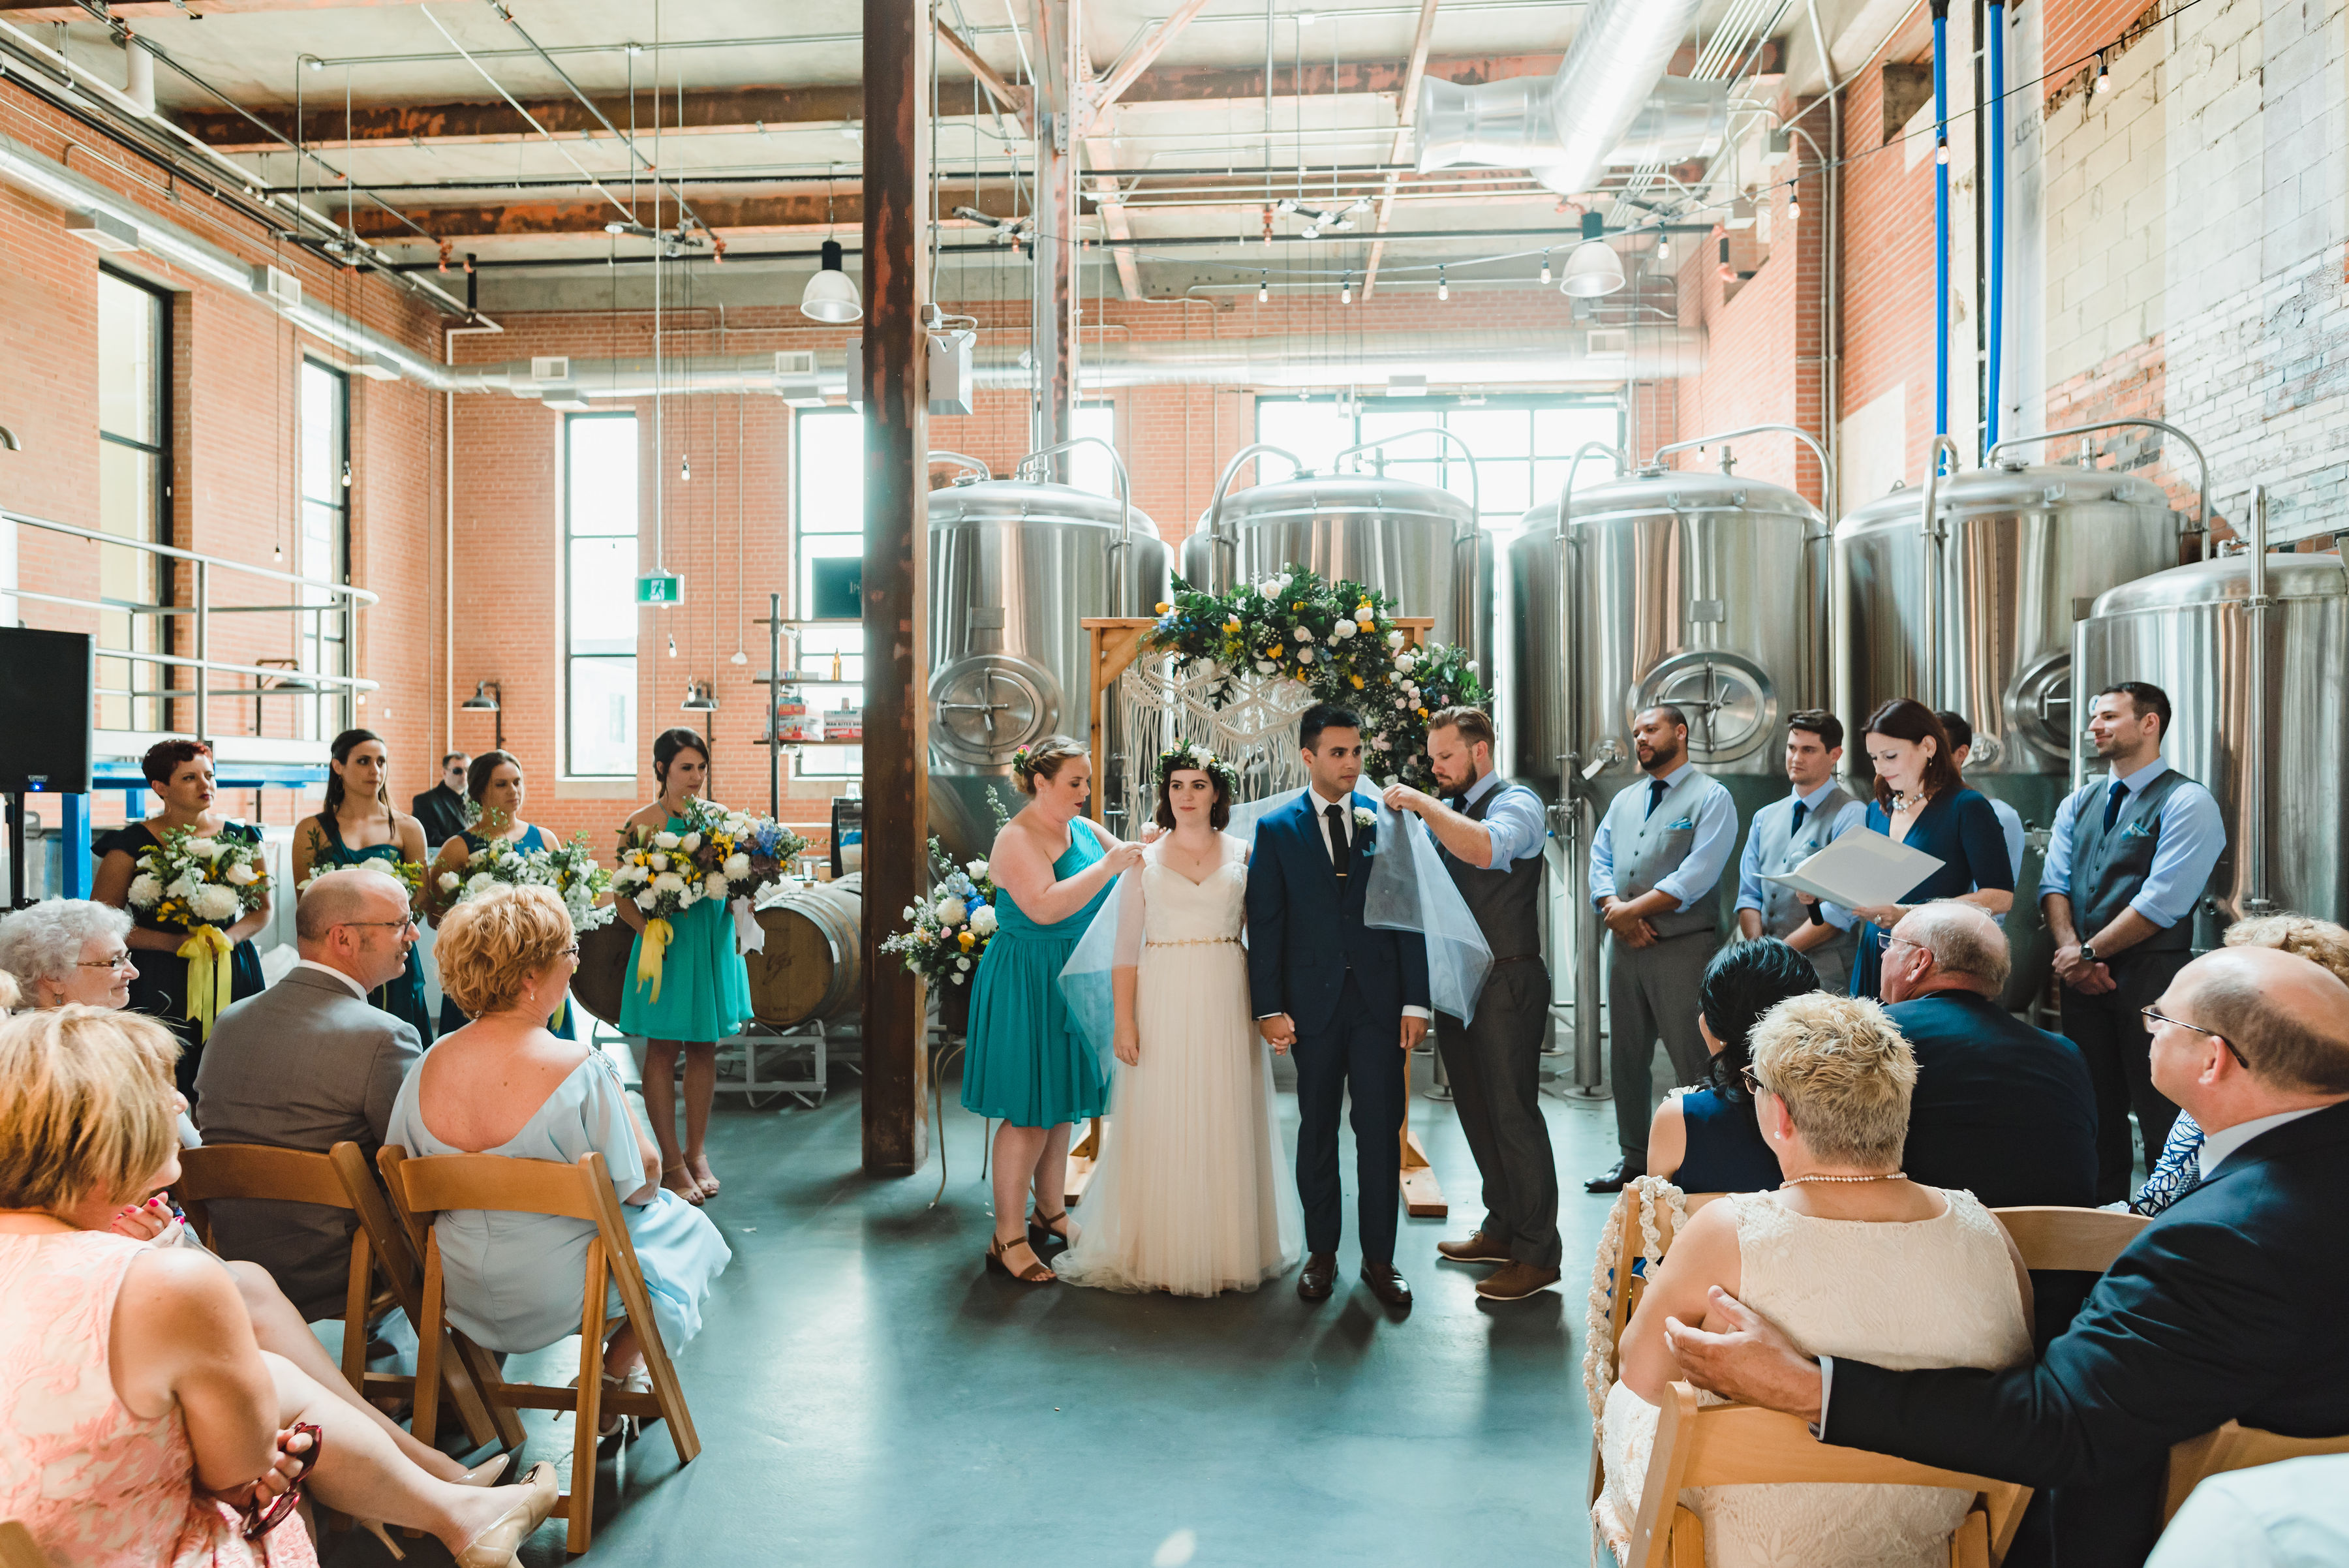 wedding ceremony in an old brewery with brewing tanks behind the alter Toronto Junction Craft Brewing